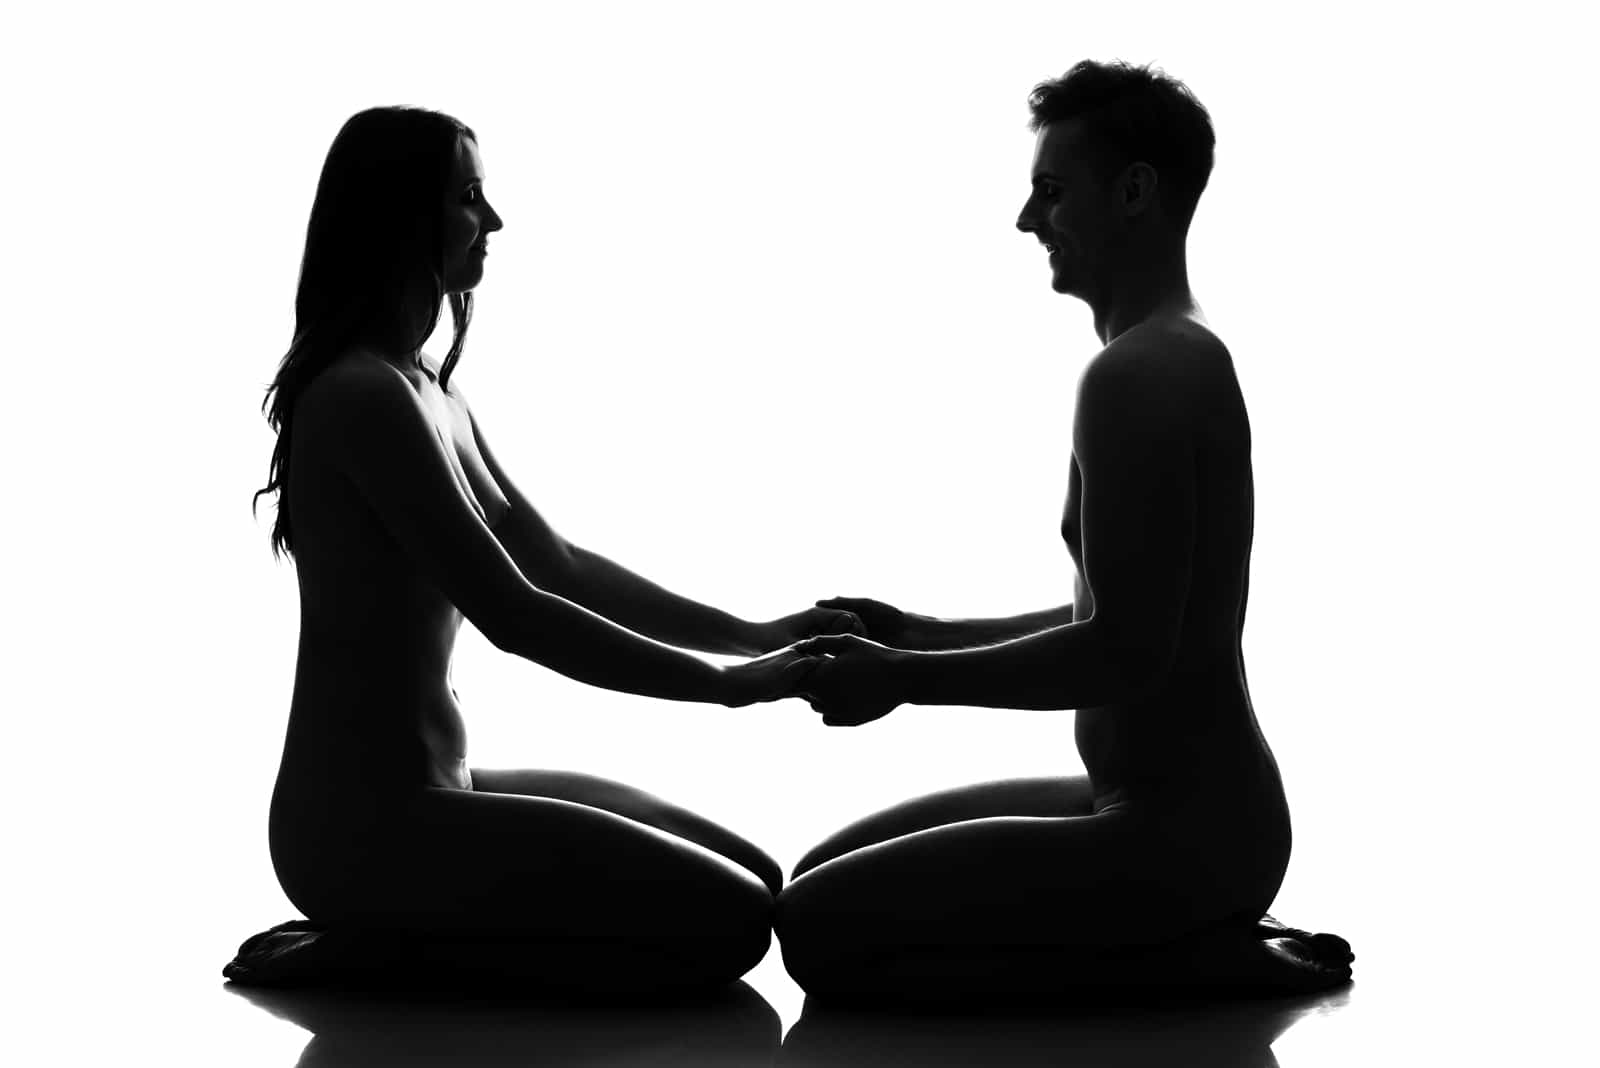 Young adult nude couple. High contrast black and white